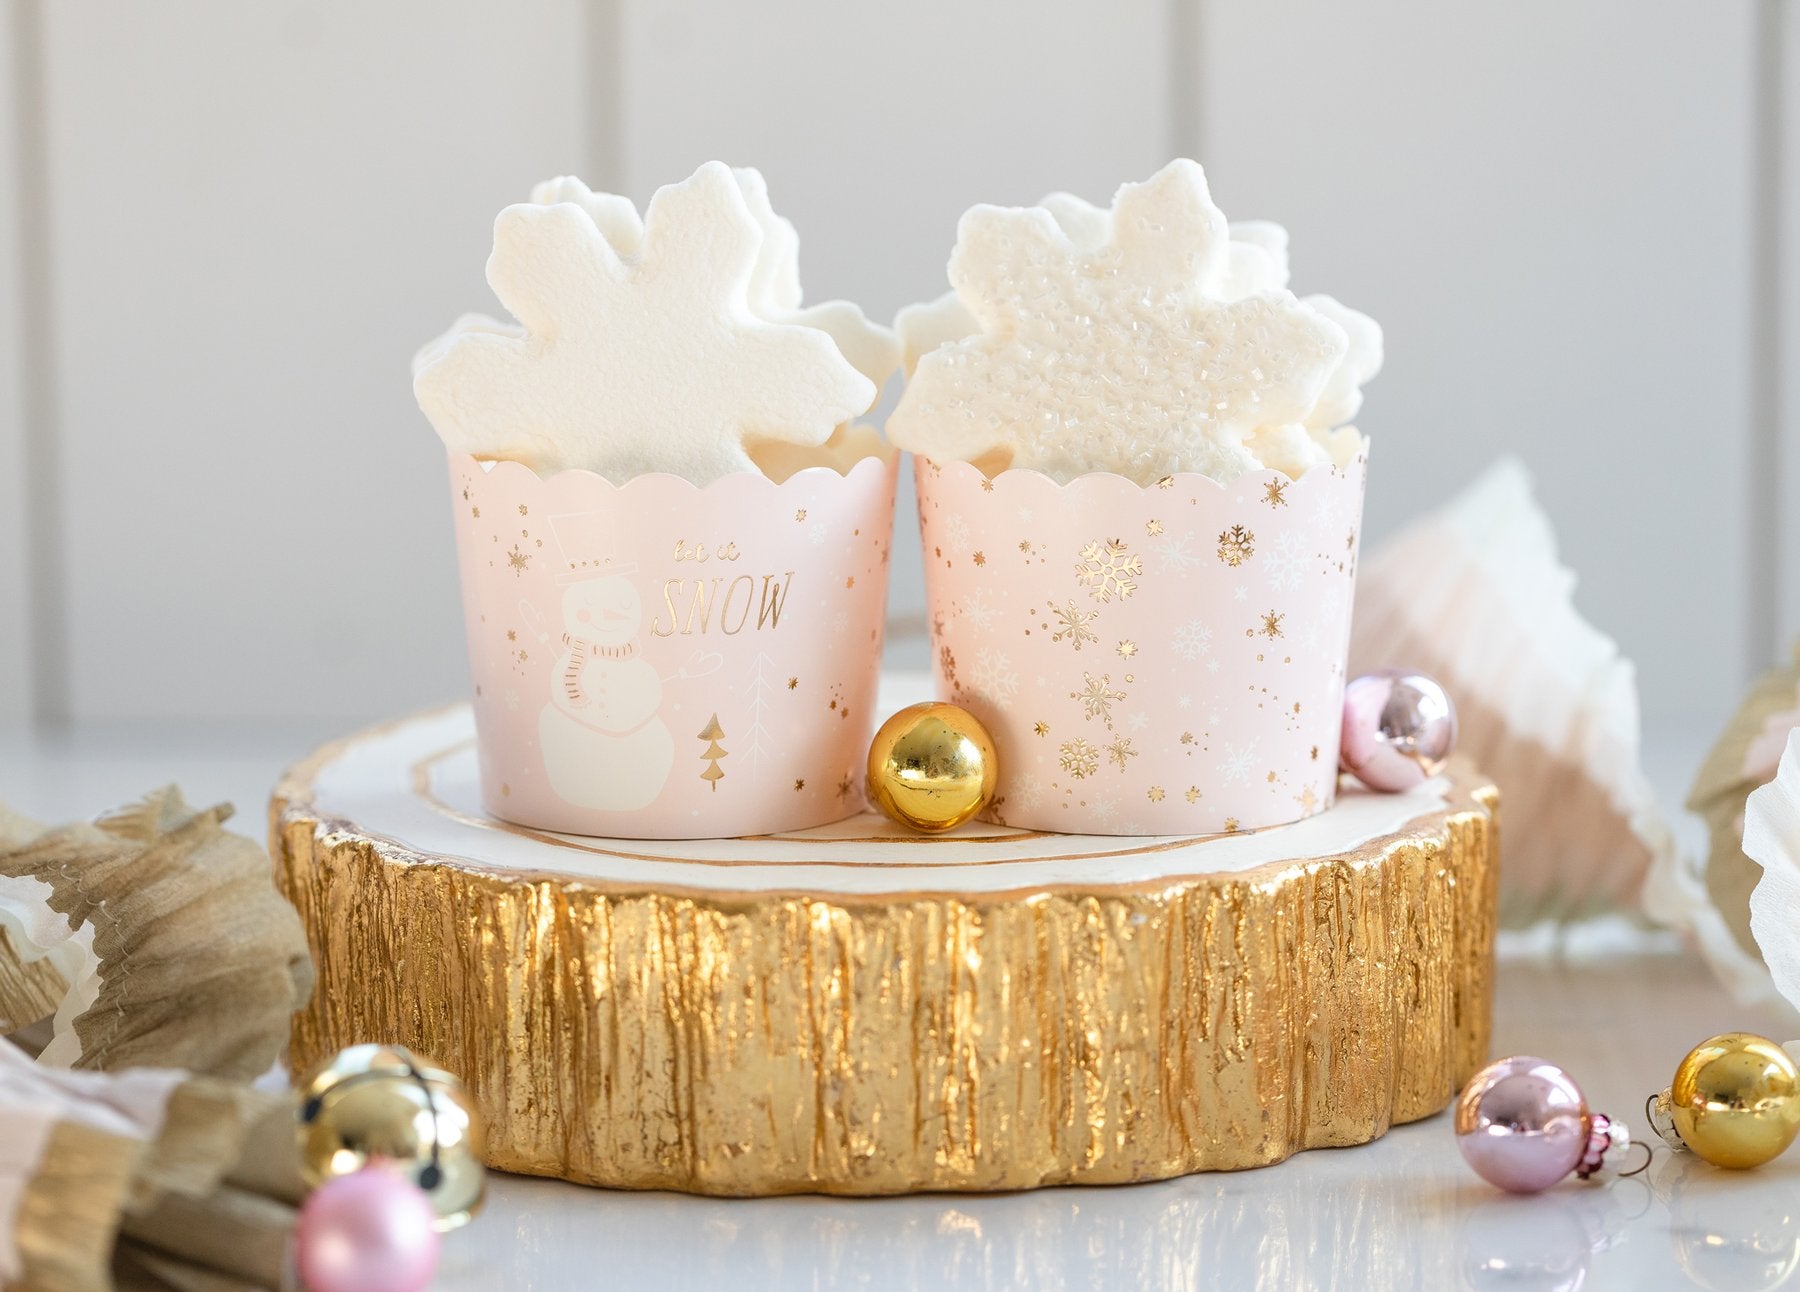 Baking cups are for more than just baking. They are so versatile and make a beautiful presentation your party guests are sure to enjoy!